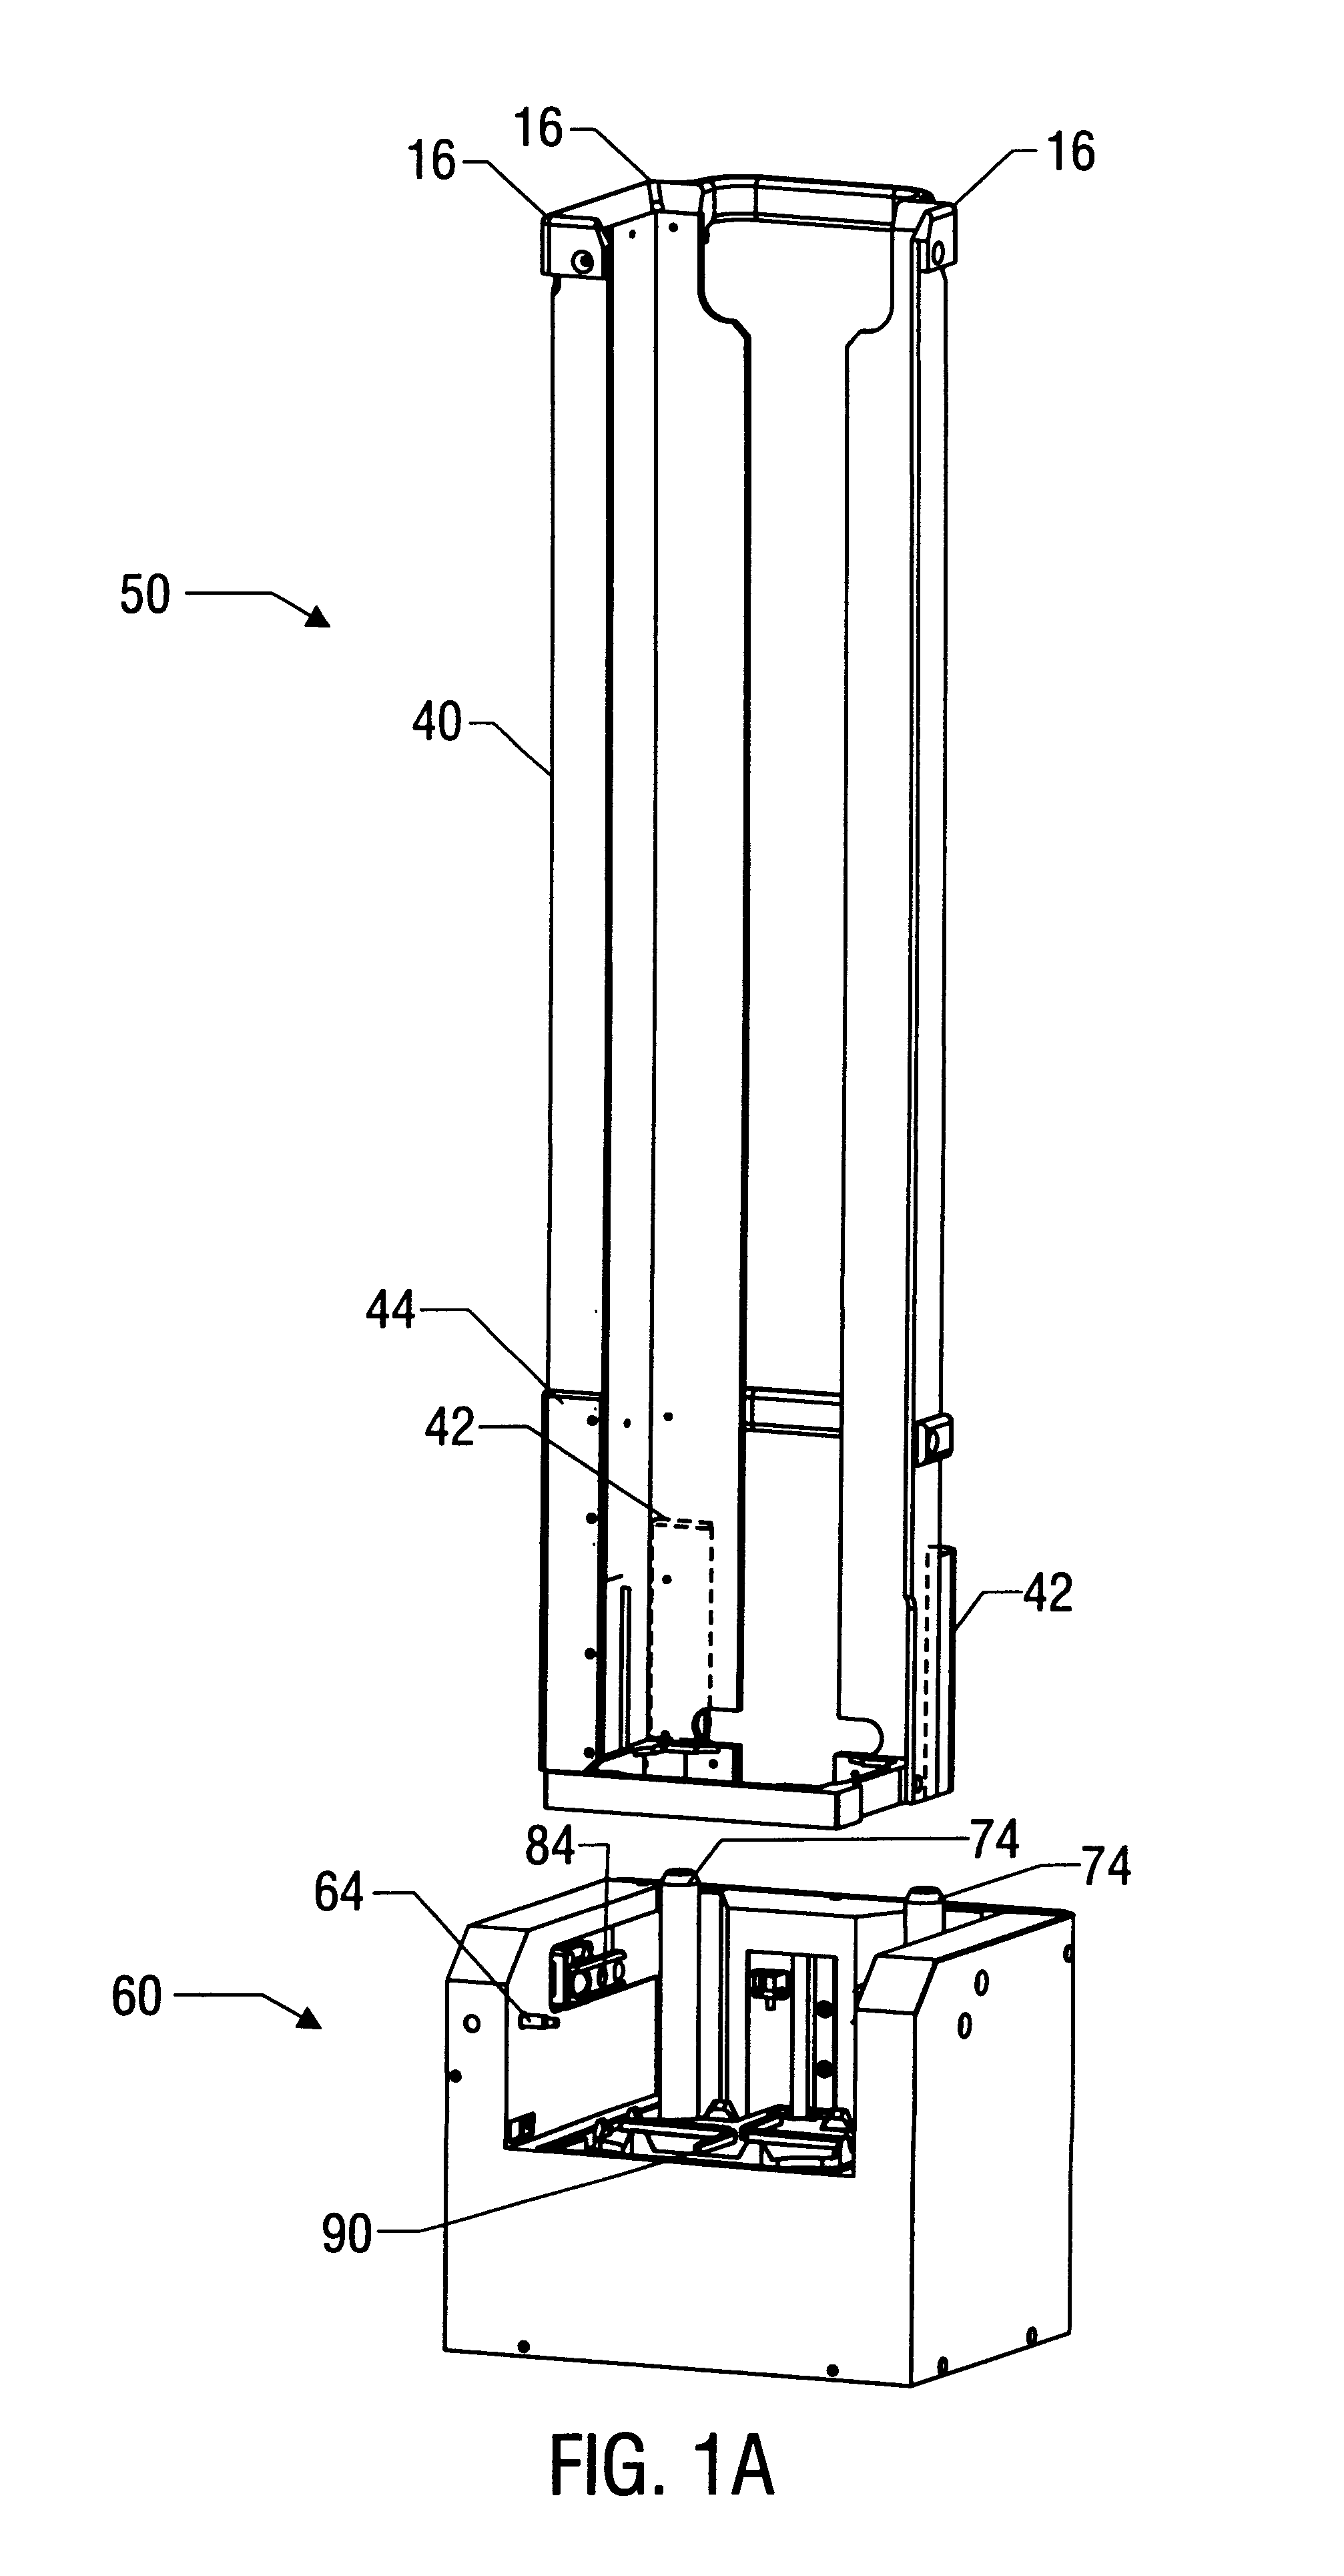 Plate stacker apparatus